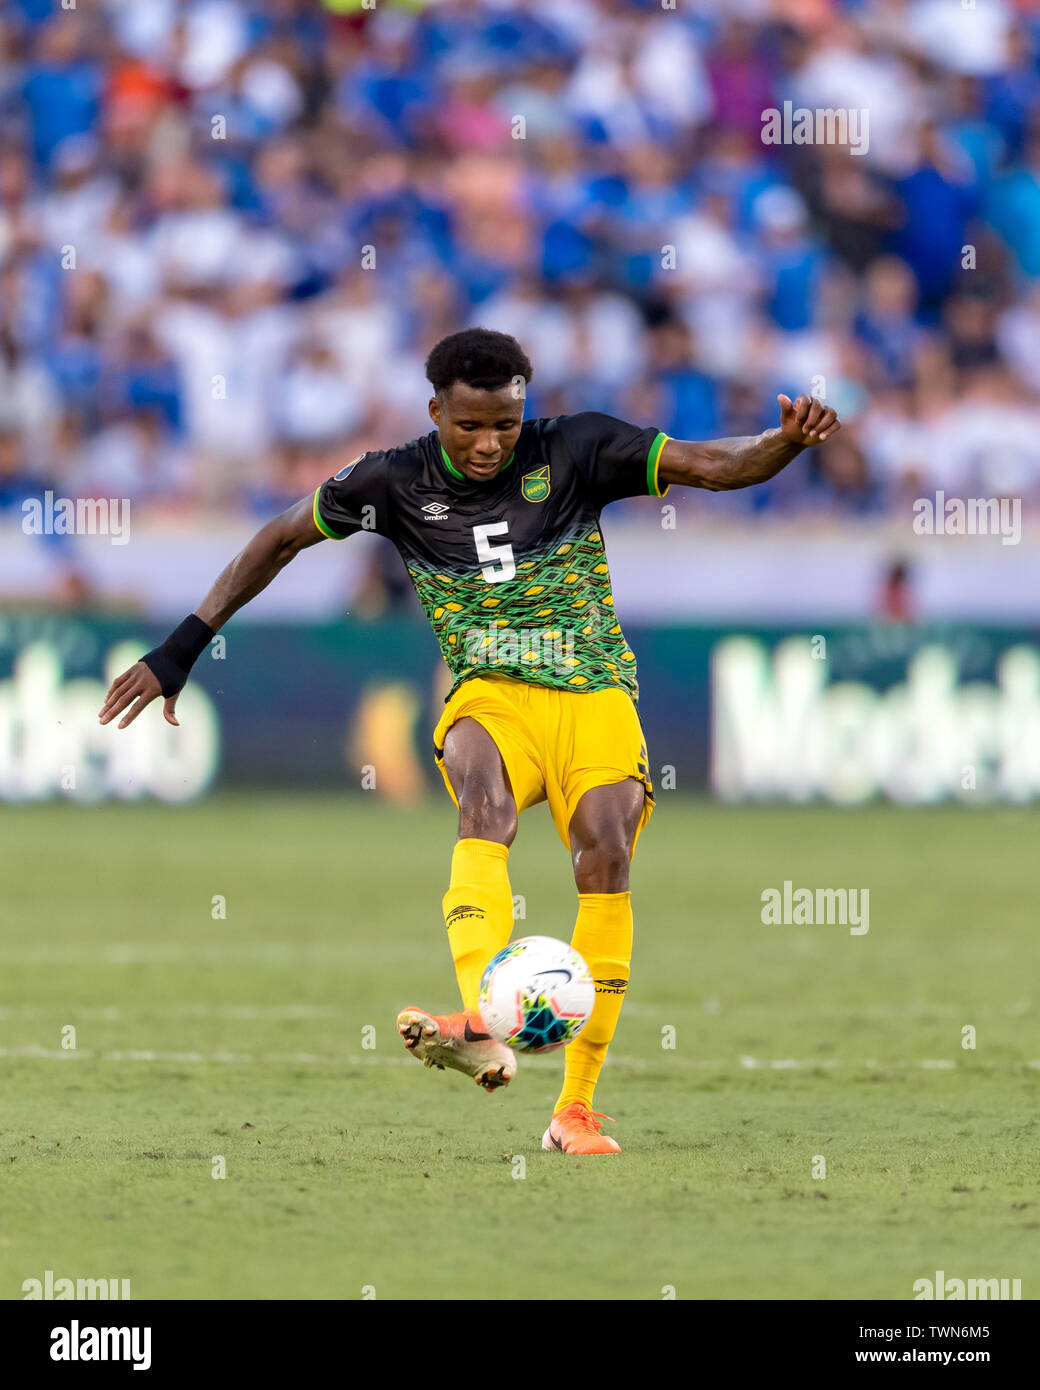 June 21, 2019 : Jamaica defender Elvis Powell (5) during a Concacaf Gold Cup group c match between El Salvador and Jamaica at BBVA Stadium in Houston, Texas. The final ended in a tie 0-0. Maria Lysaker/CSM Stock Photo